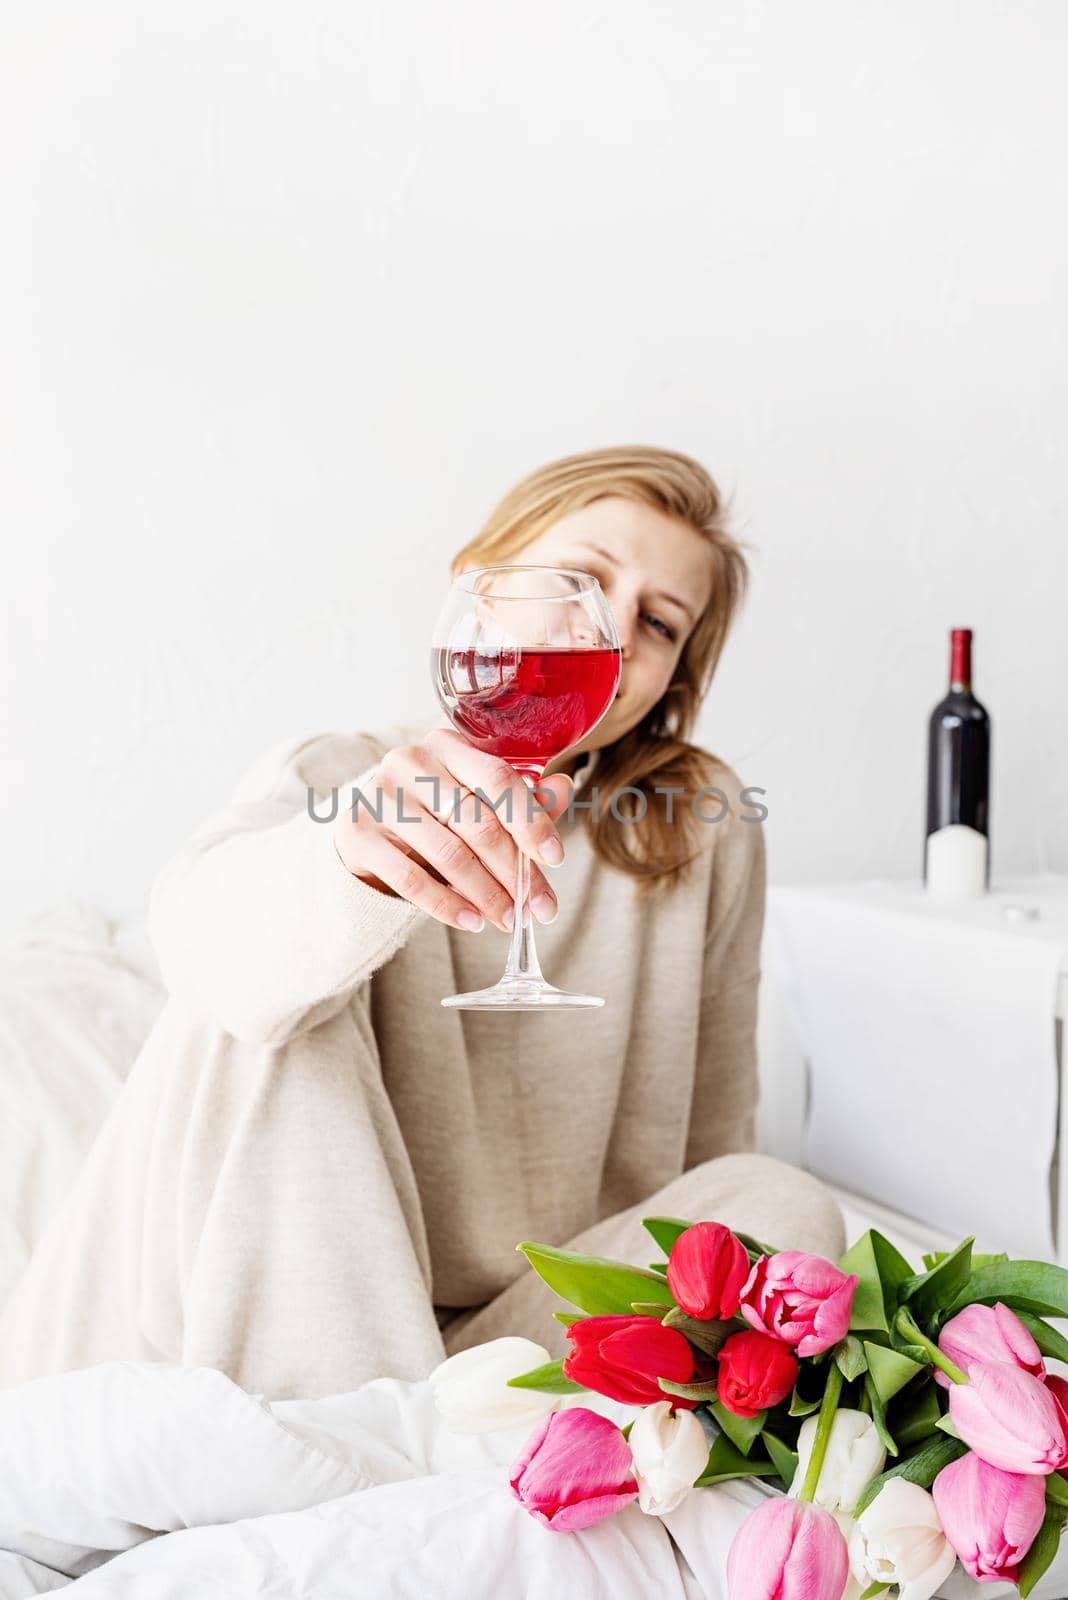 Happy woman sitting on the bed wearing pajamas, with pleasure enjoying flowers and a glass of red wine